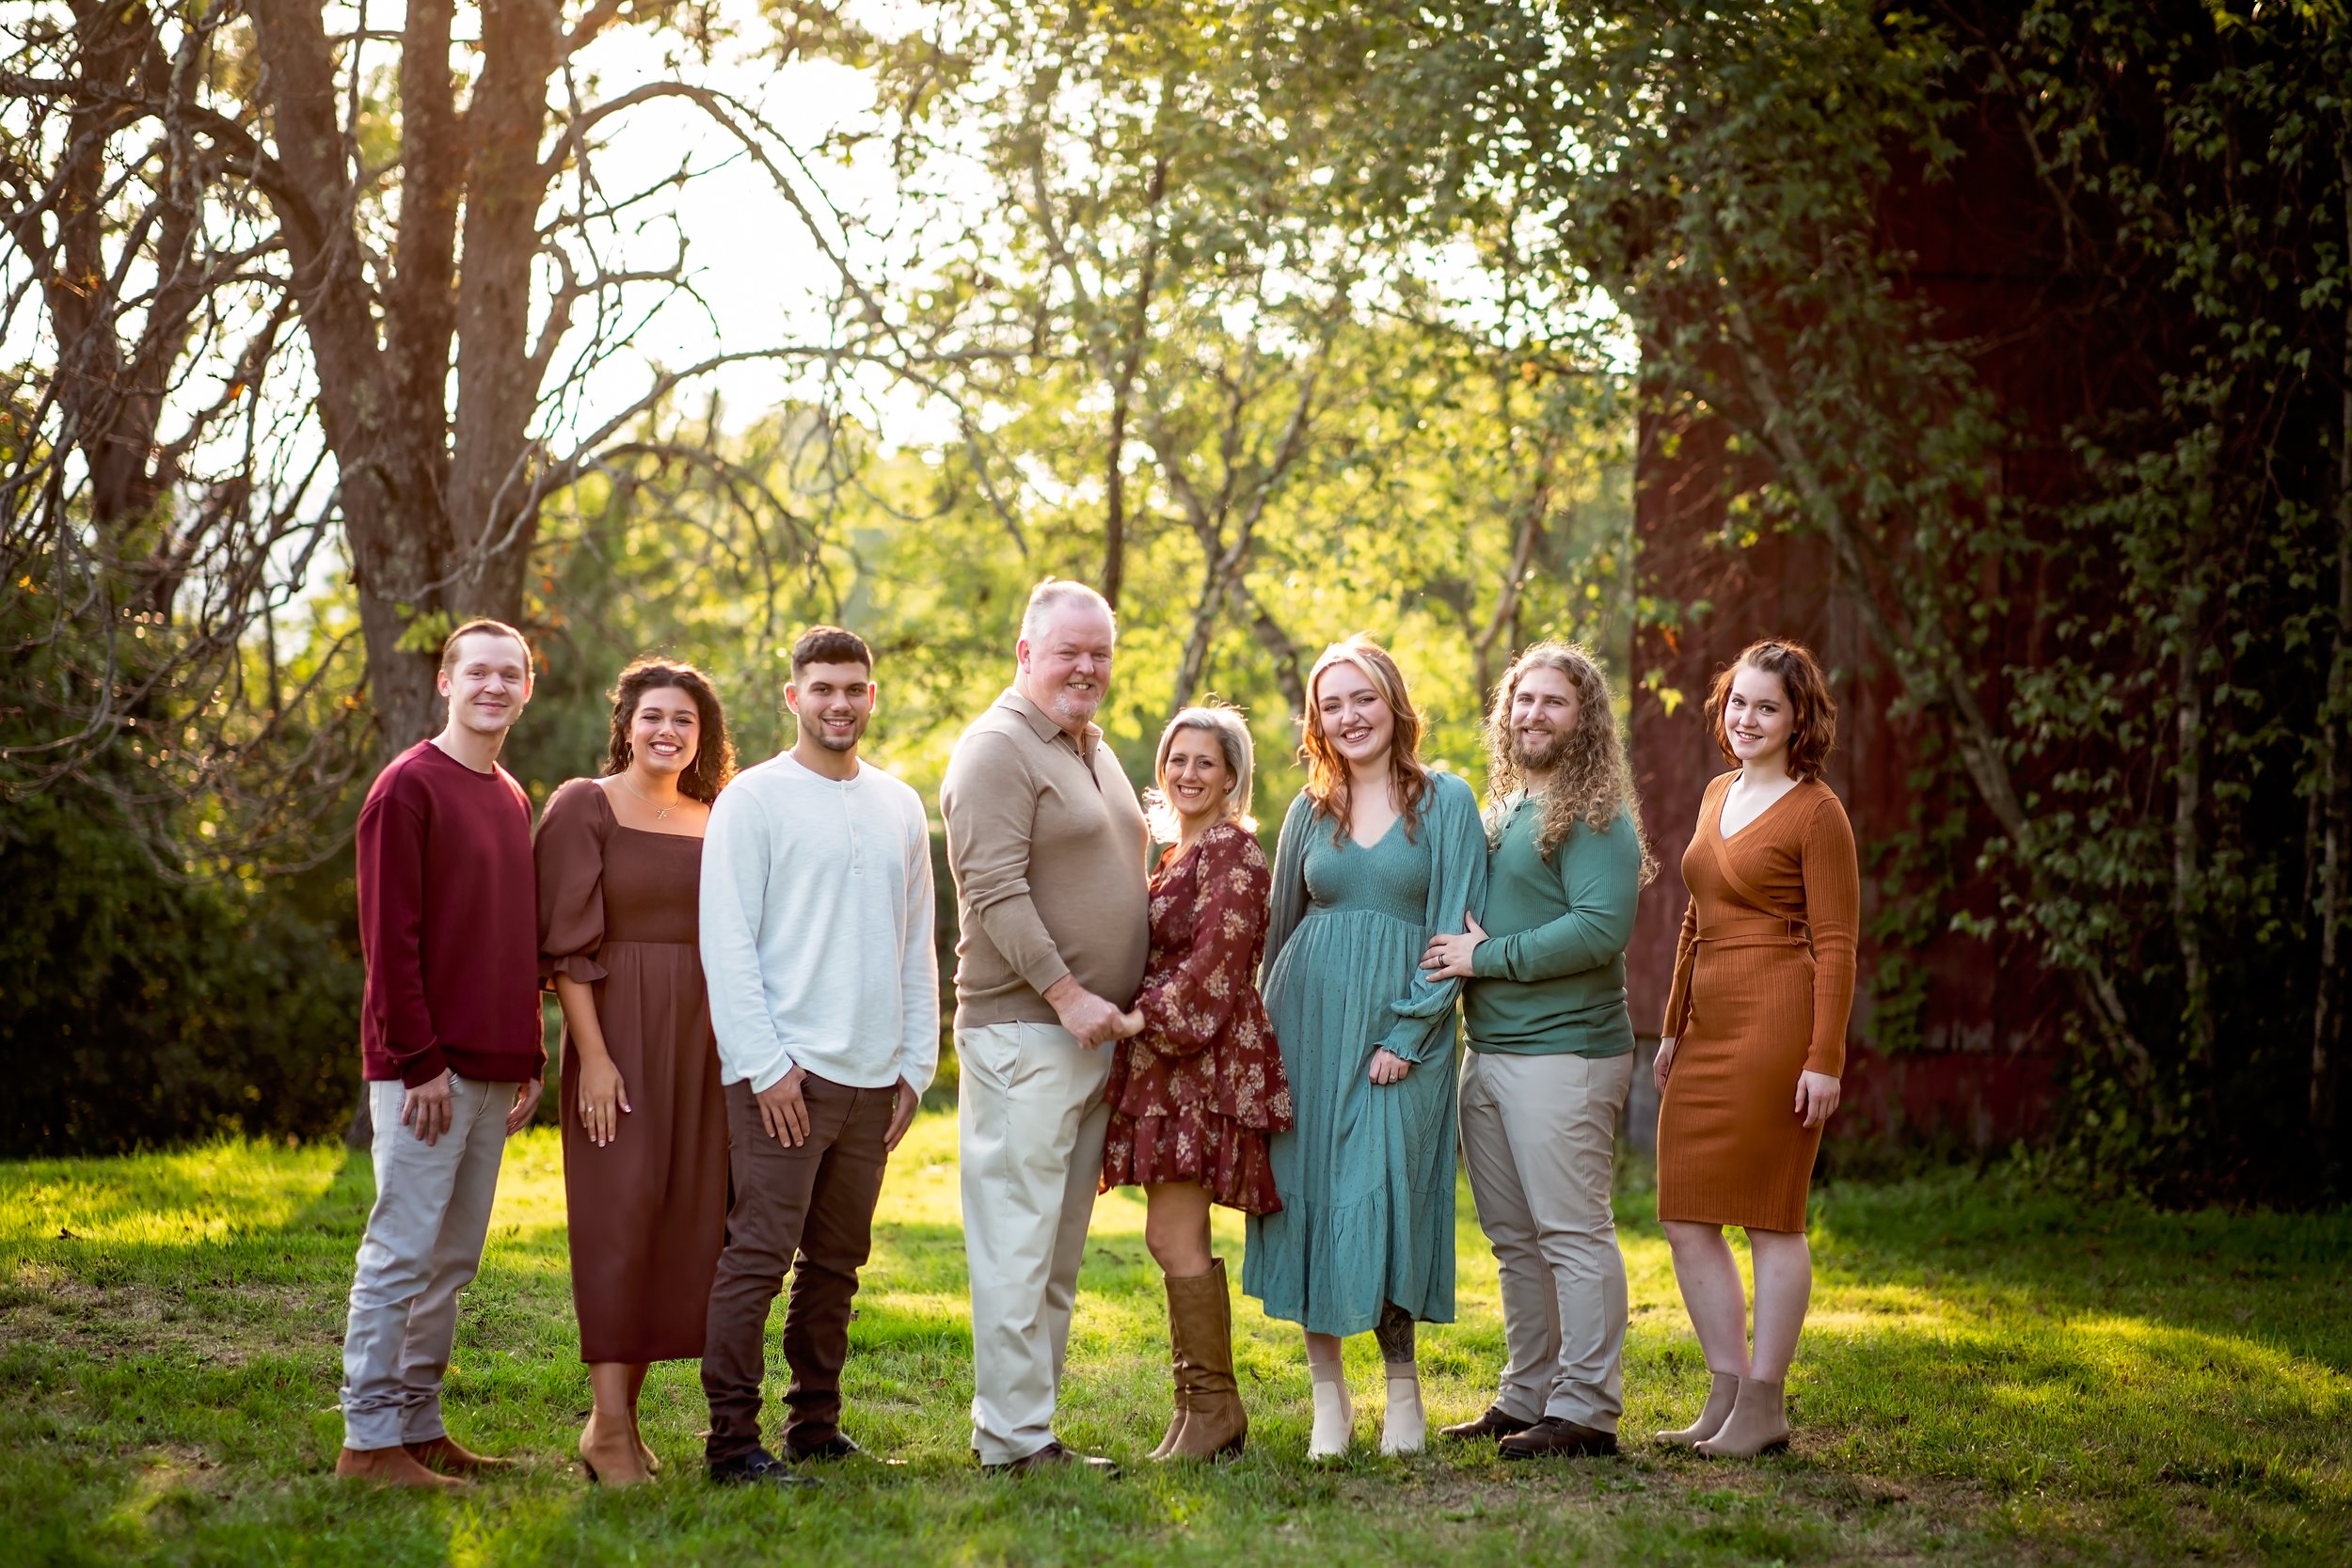  Parents with their grown and married children stand together for a family portrait in a wooded NJ park 